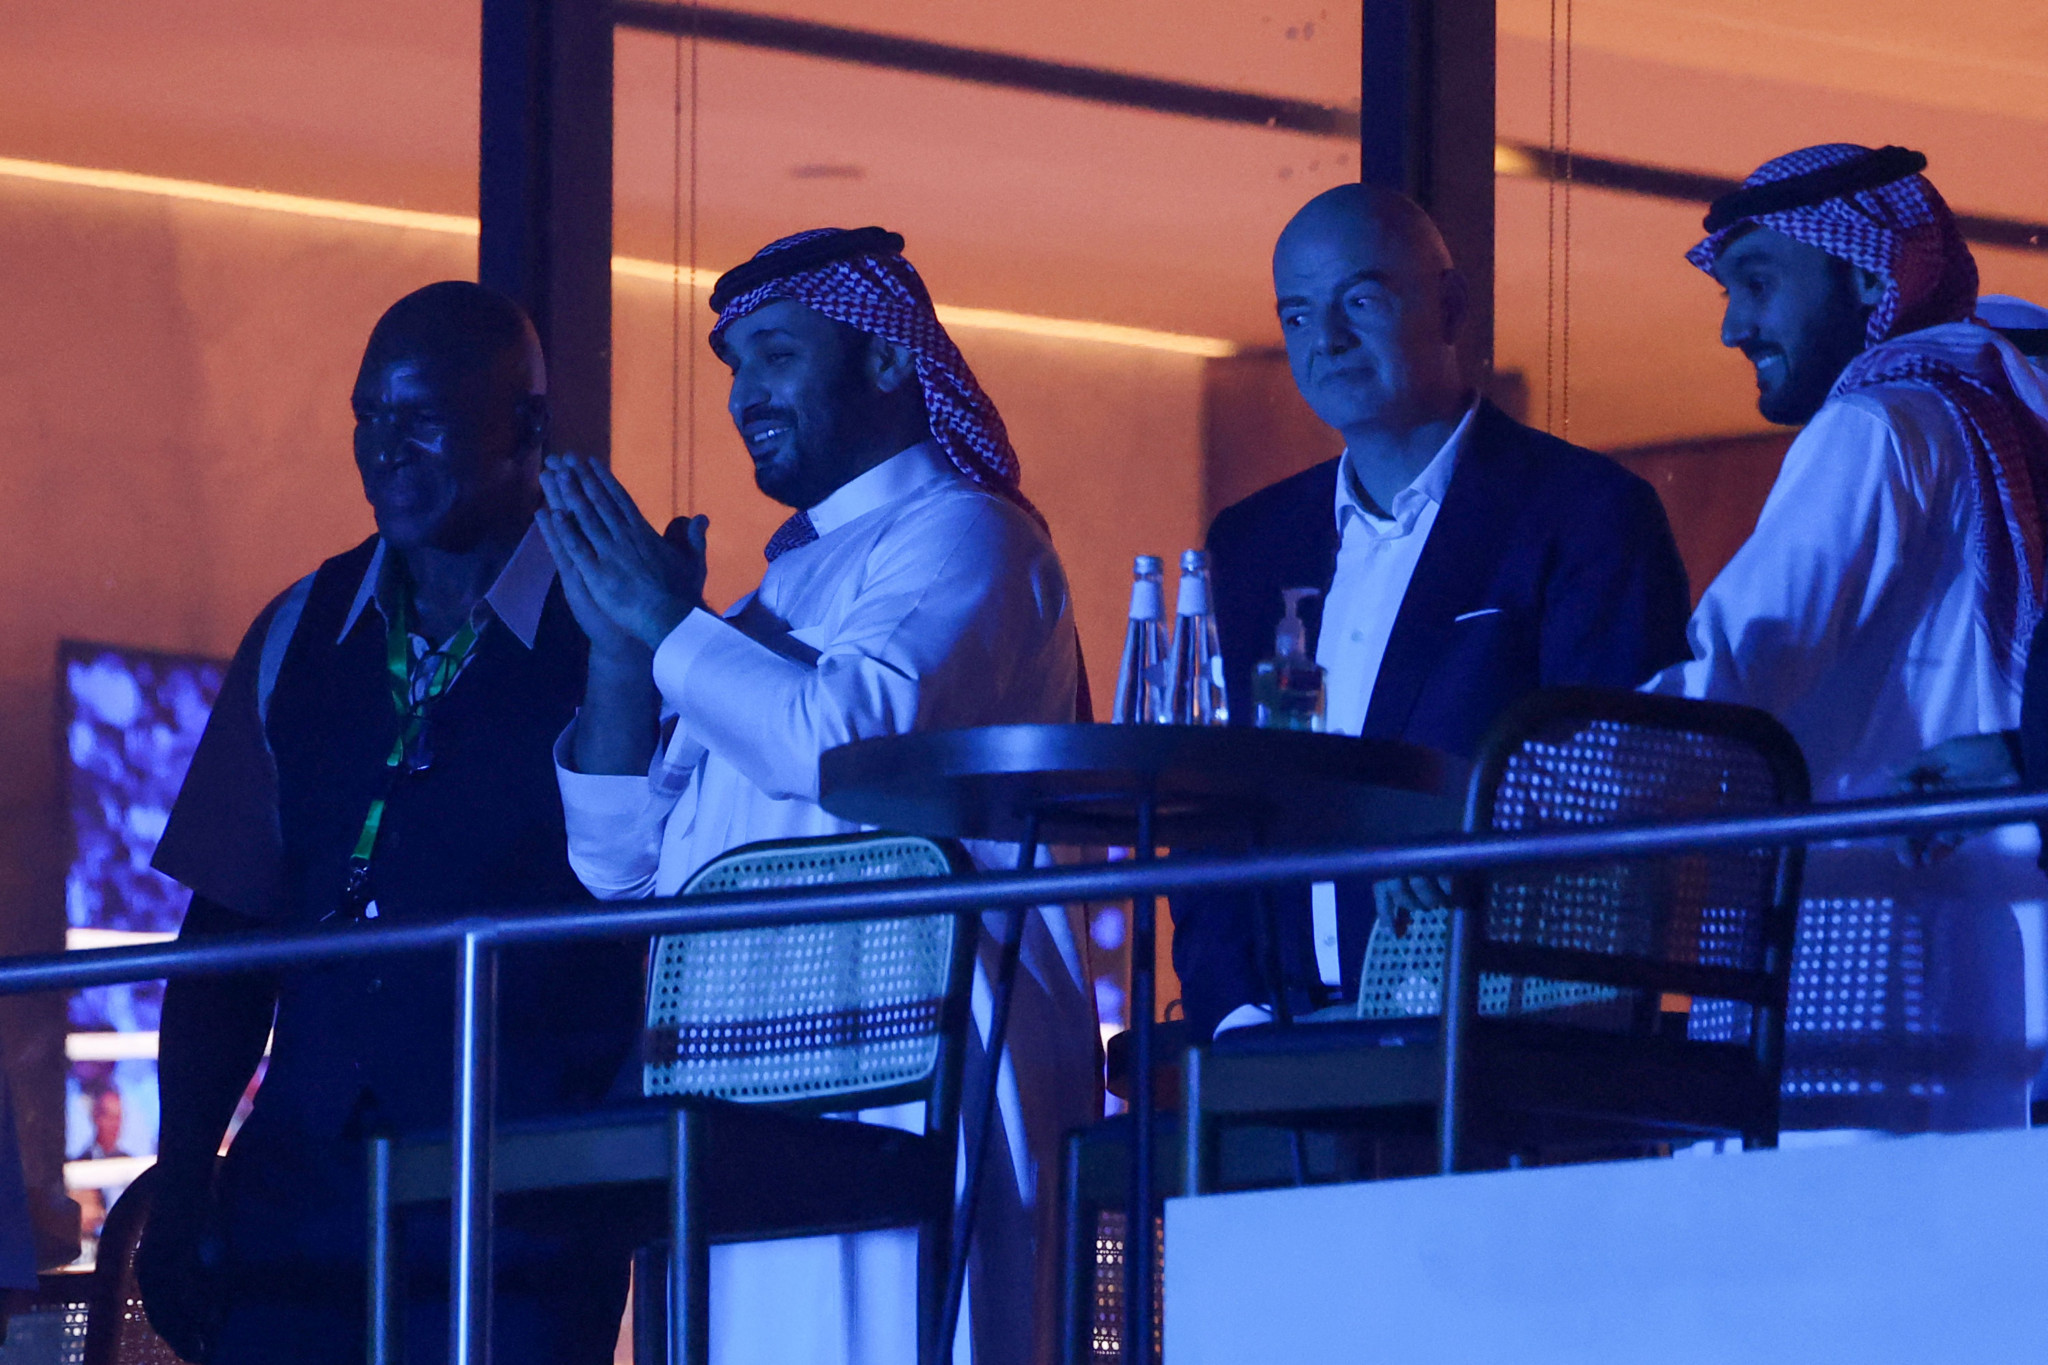 Crown Prince Mohammed bin Salman Al Saud, second left, was joined by FIFA President Gianni Infantino, second right, for the boxing fight ©Getty Images